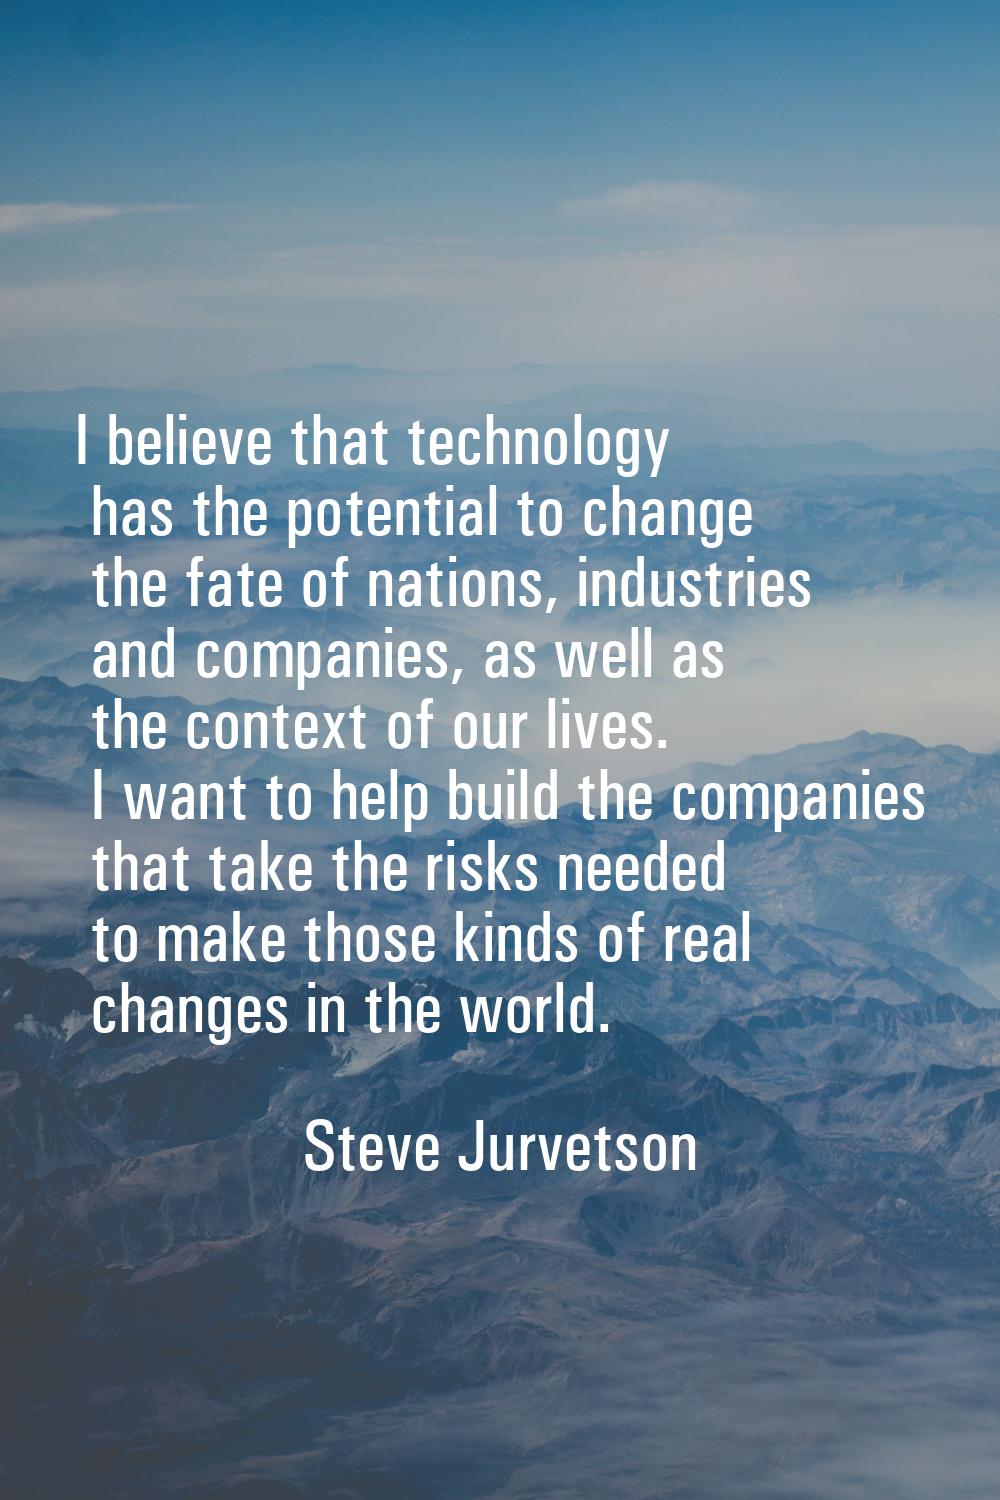 I believe that technology has the potential to change the fate of nations, industries and companies